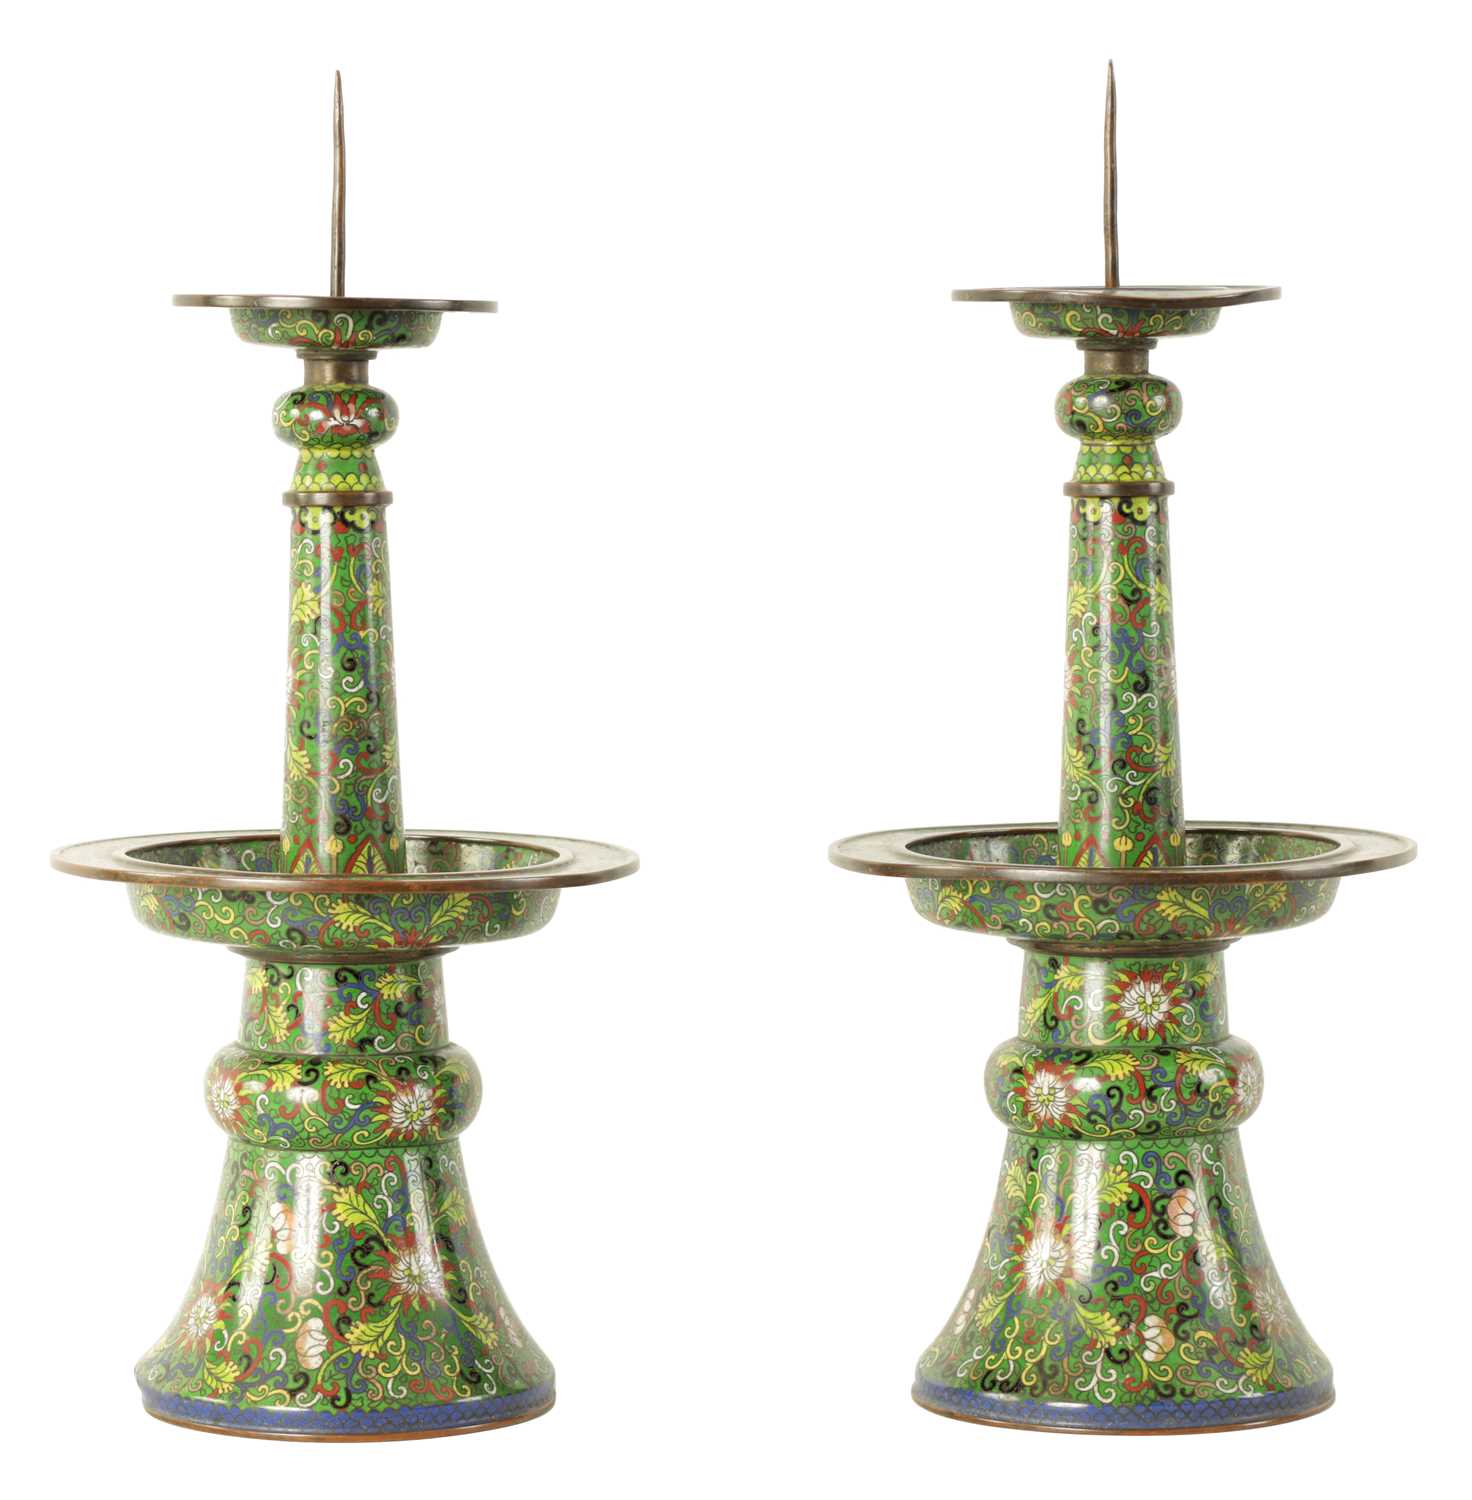 Lot 79 - A PAIR OF 19TH CENTURY CHINESE CLOISONNE ENAMEL PRICKET STICKS